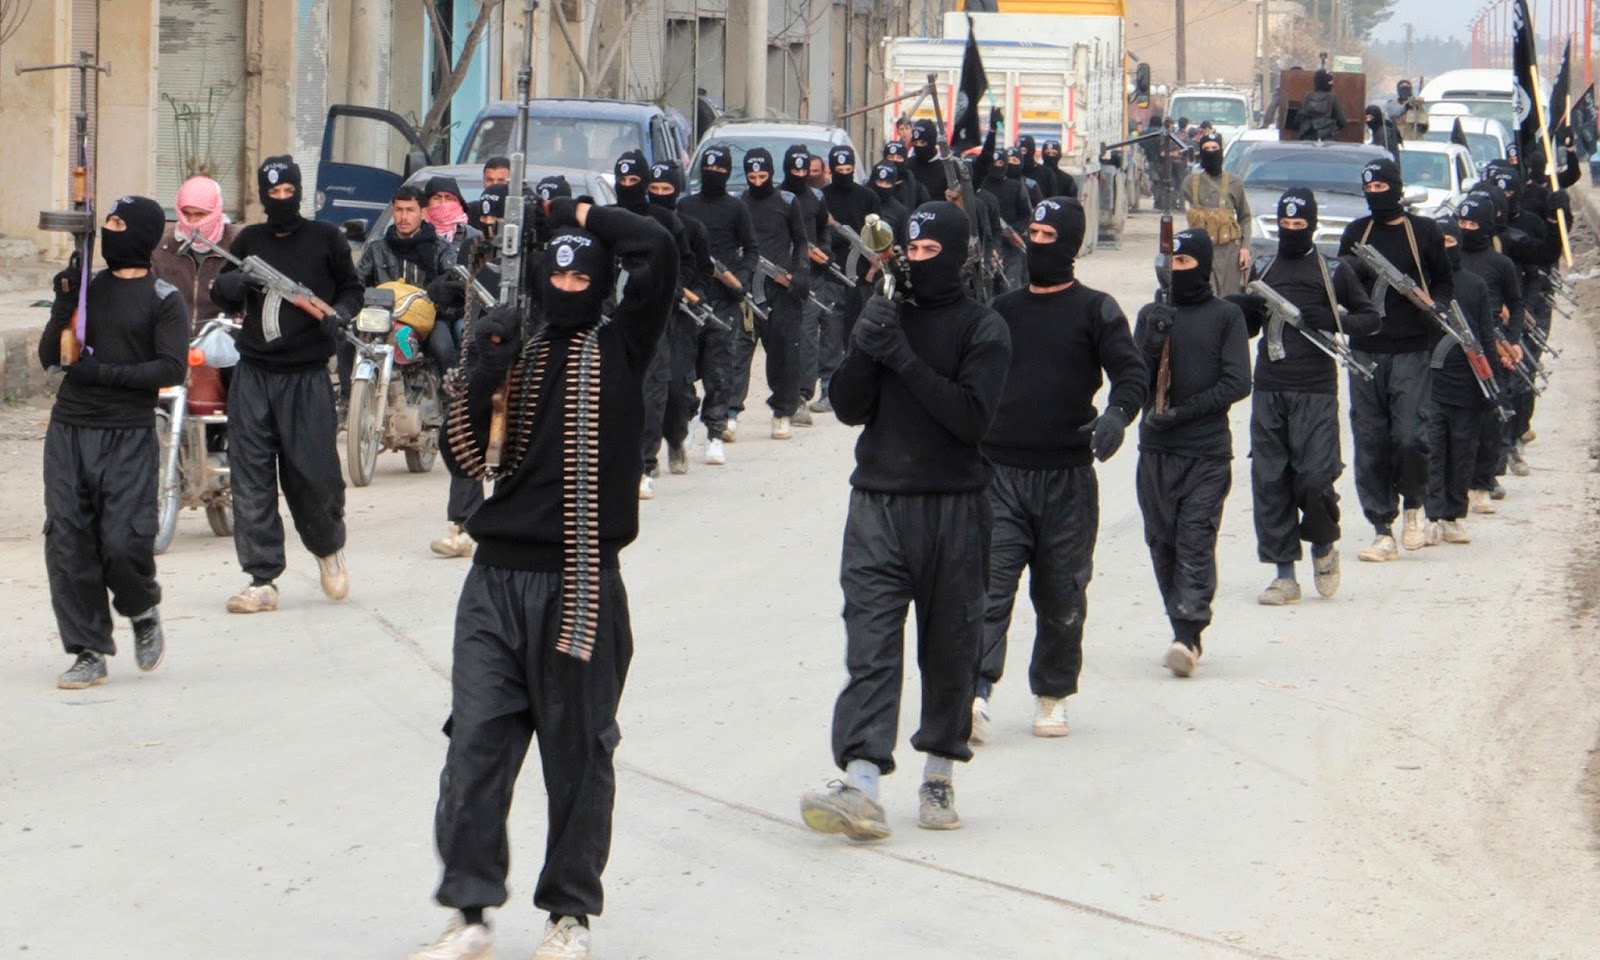 16 Jihadist group ISIS declares Islamic ‘Caliphate’ in Iraq Syria - Terrorism in the Philippines: Can Increased Maritime Security Help Stop the Flow of Foreign Fighters?